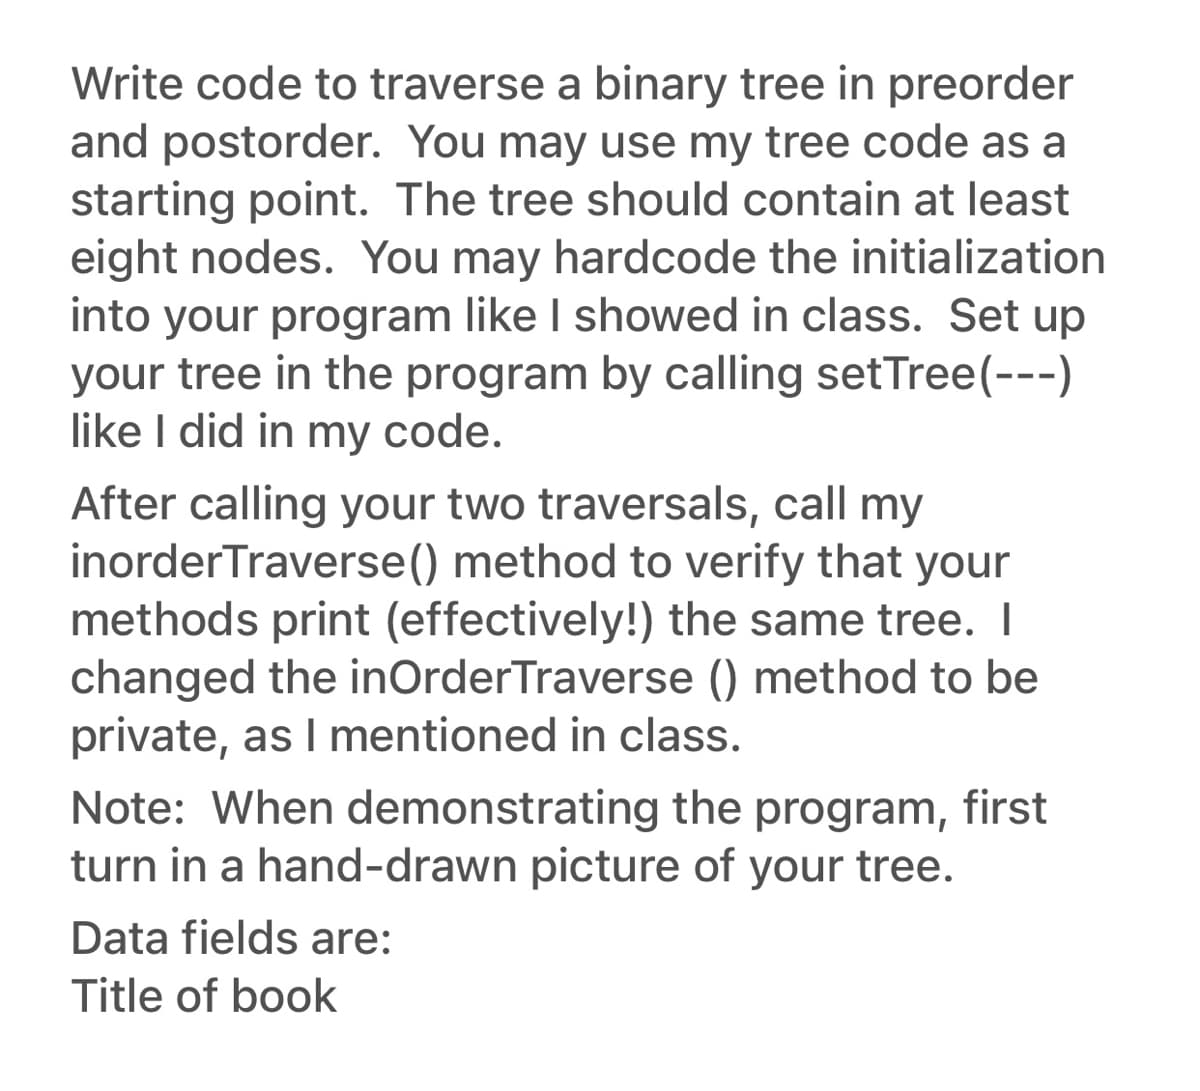 Write code to traverse a binary tree in preorder
and postorder. You may use my tree code as a
starting point. The tree should contain at least
eight nodes. You may hardcode the initialization
into your program like I showed in class. Set up
your tree in the program by calling setTree(---)
like I did in my code.
After calling your two traversals, call my
inorder Traverse() method to verify that your
methods print (effectively!) the same tree. I
changed the inOrder Traverse () method to be
private, as I mentioned in class.
Note: When demonstrating the program, first
turn in a hand-drawn picture of your tree.
Data fields are:
Title of book